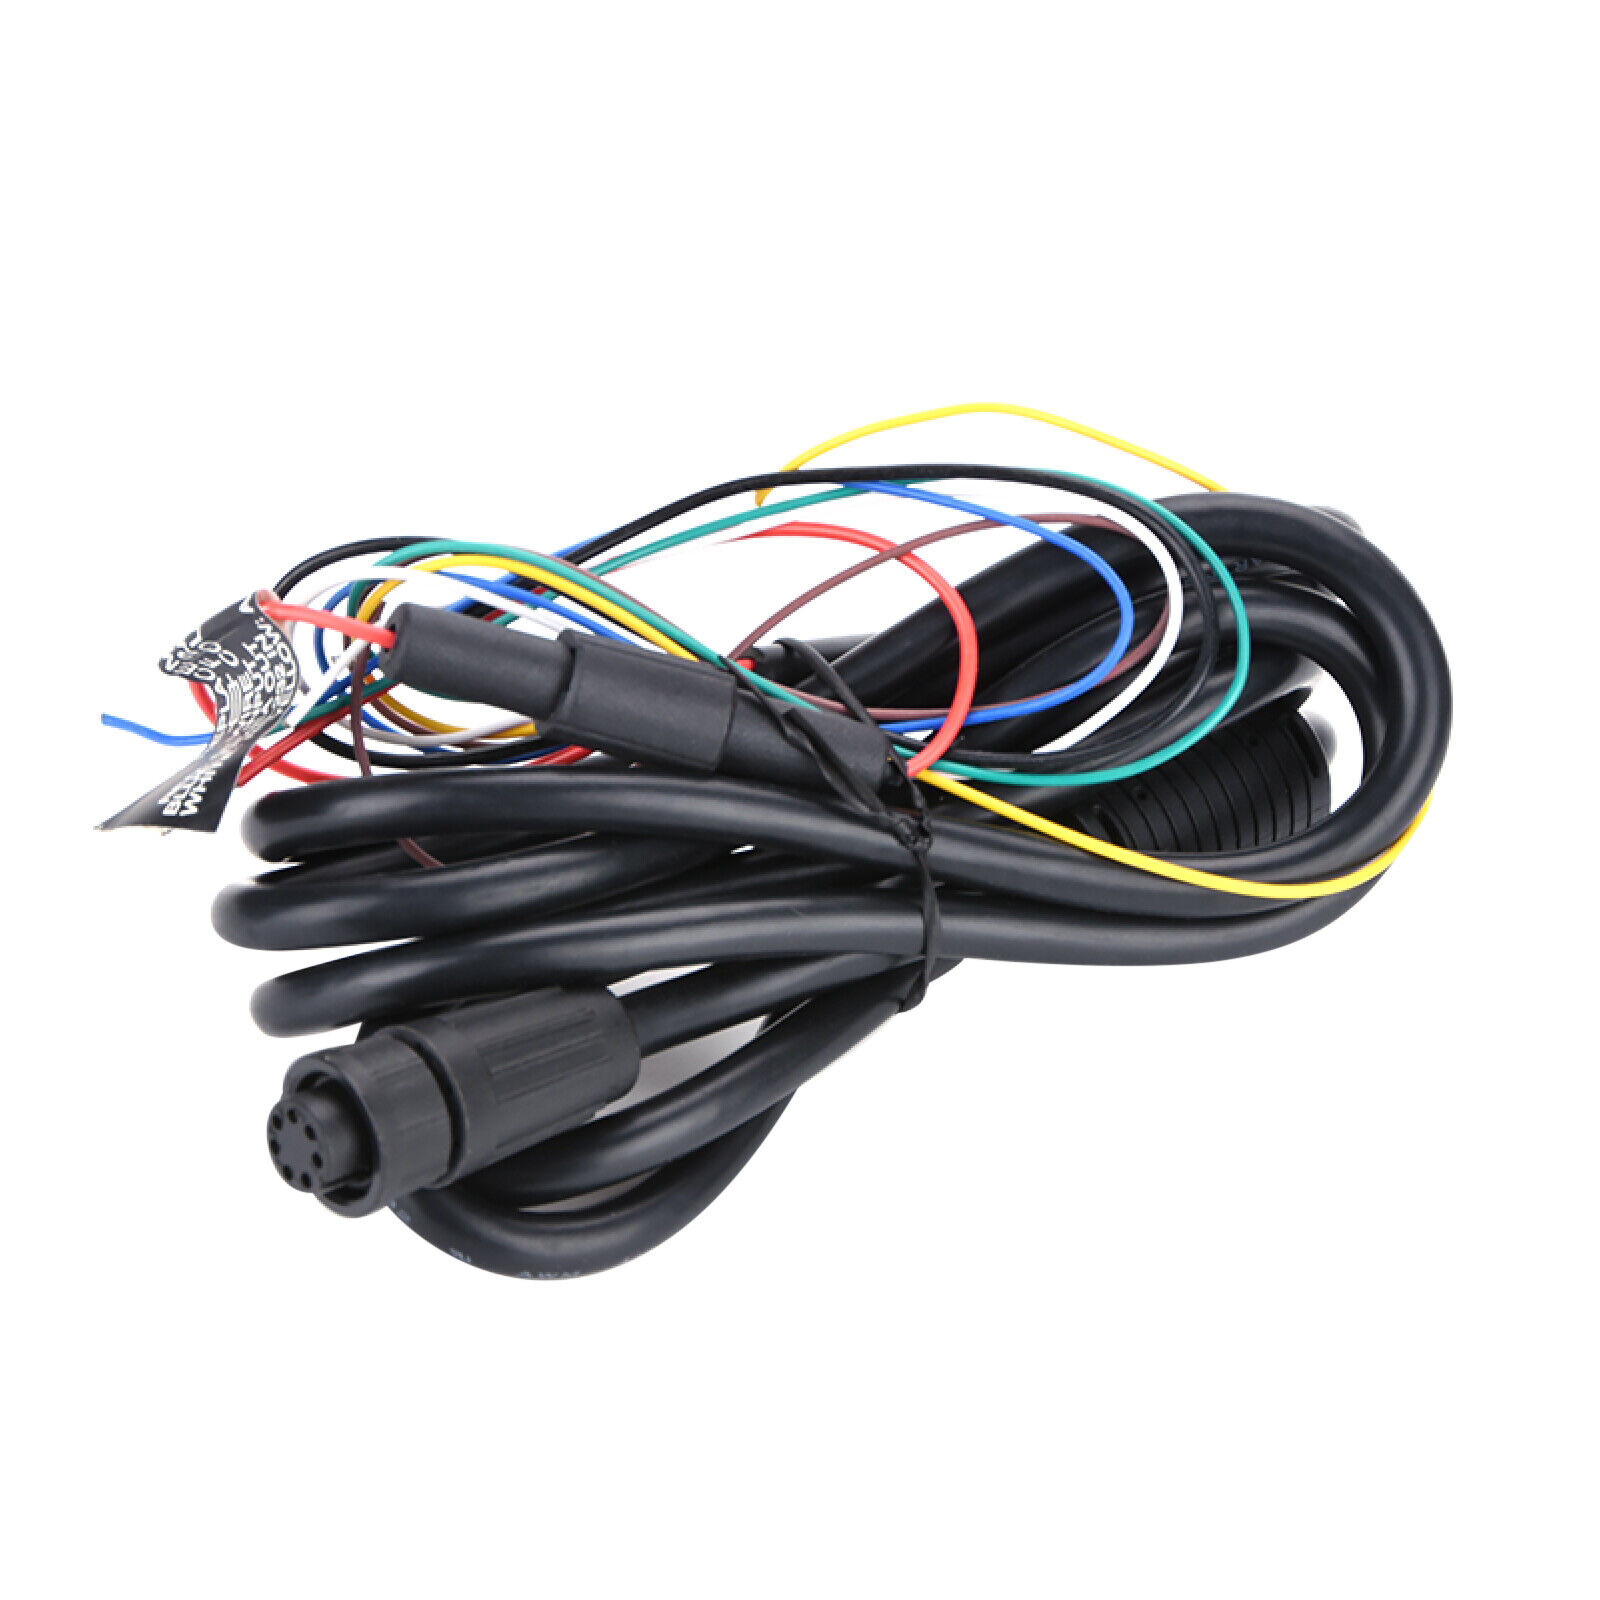 Durable 7-Pin Power Cable For GARMIN POWER CABLE GPSMAP 128 152 192C 580 GPS a